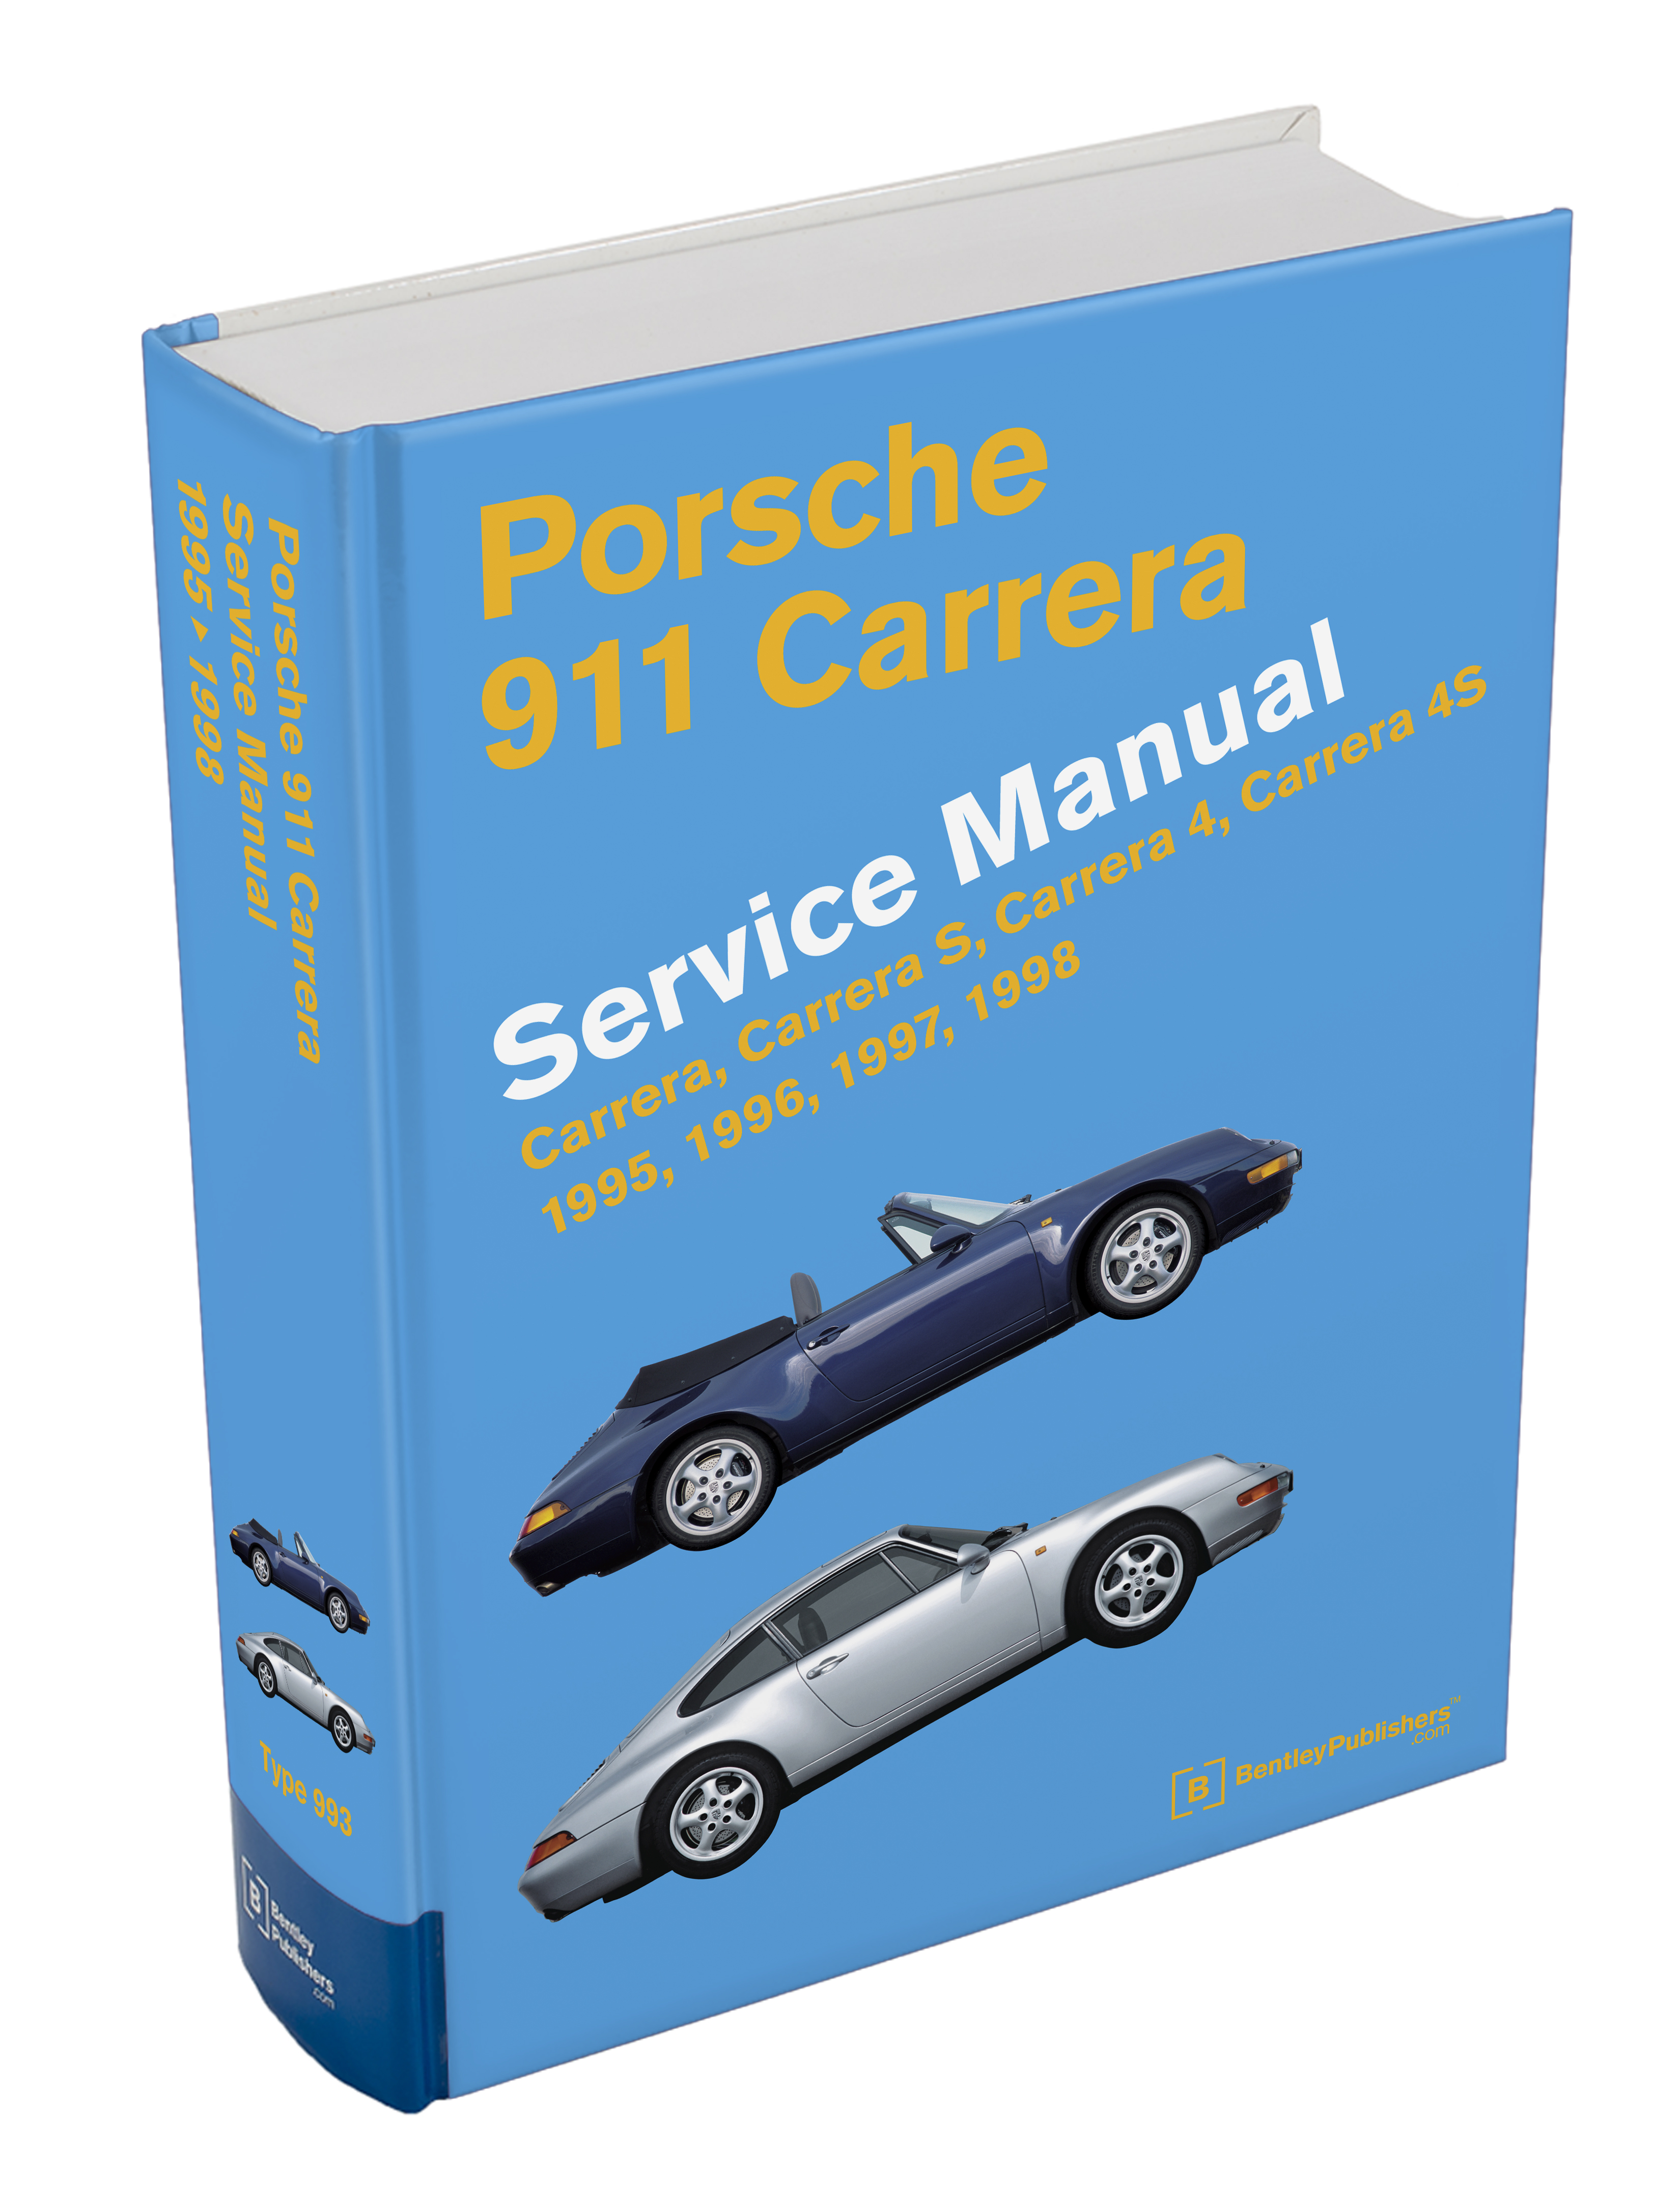 Service Manuals and a Special Limited Time Offer From Bentley Publishers